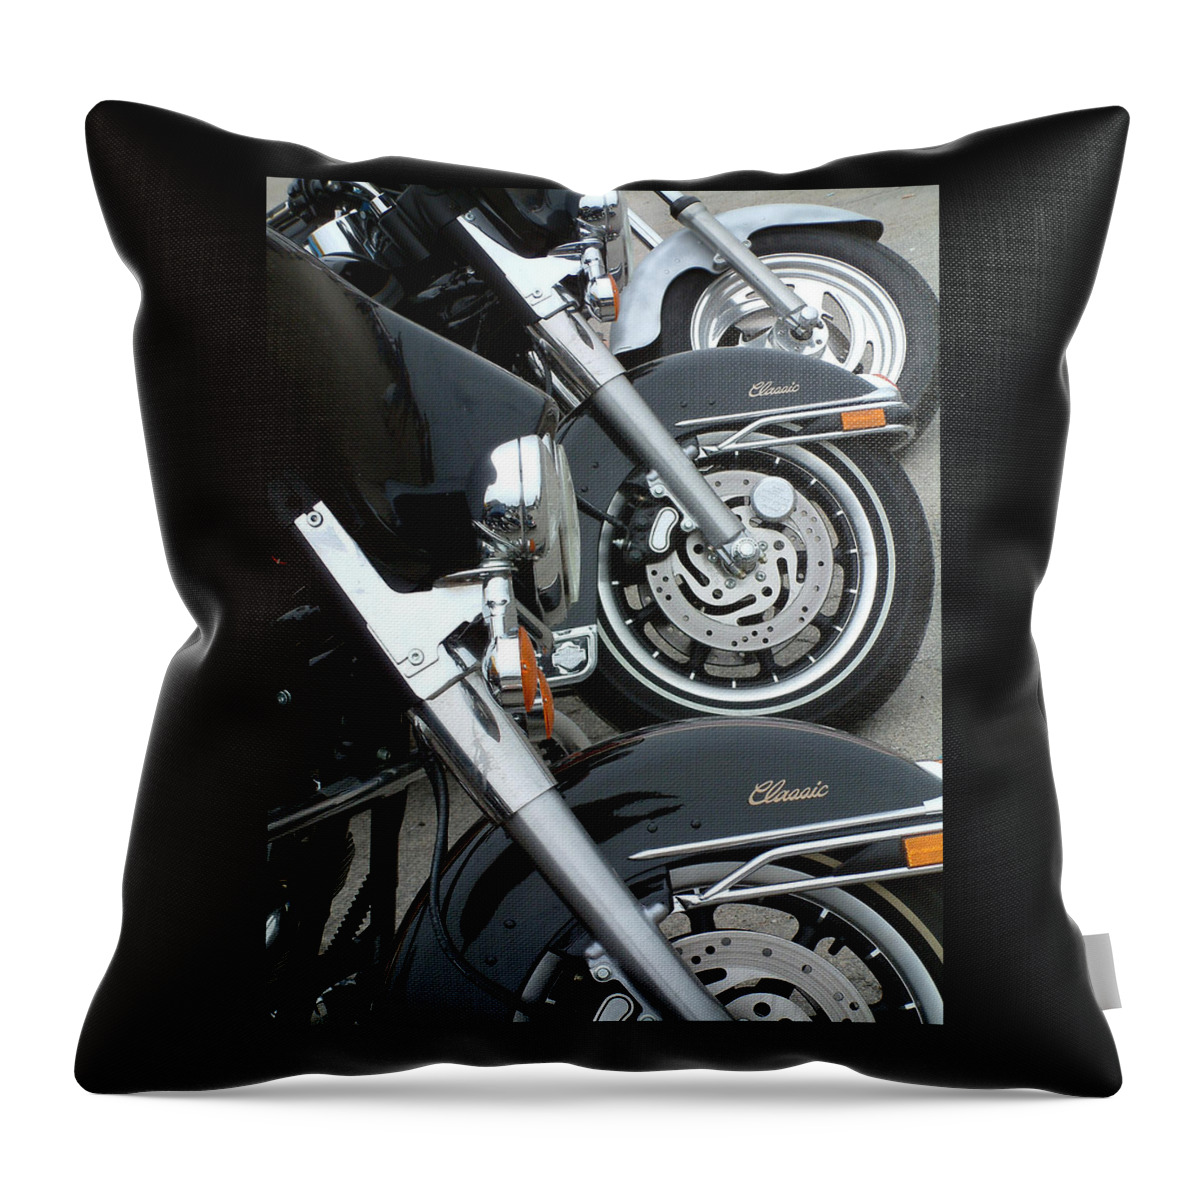 Harley Davidson Throw Pillow featuring the photograph American Classics by Thomas Pipia